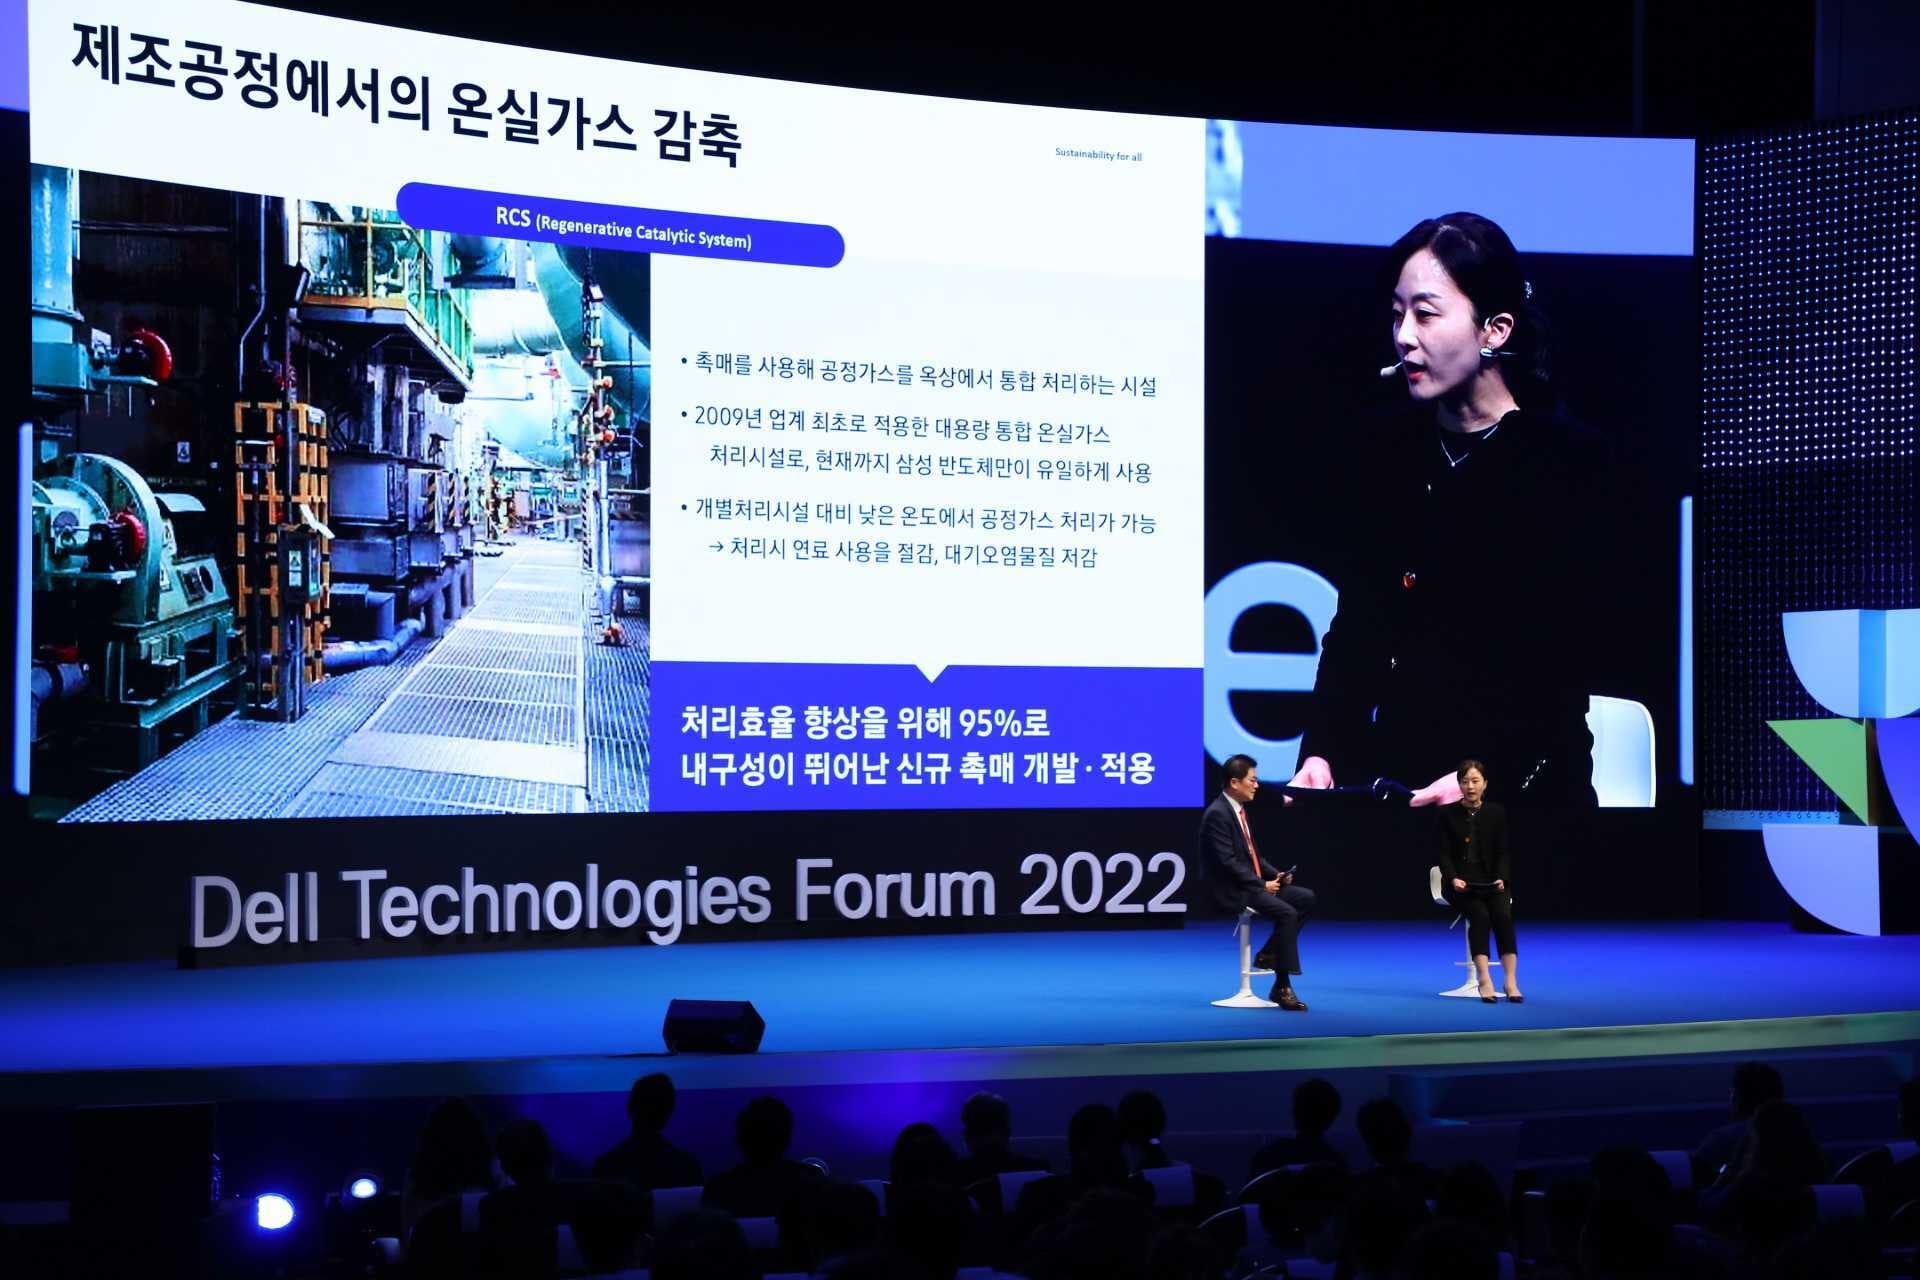 HyunJung Seo, Vice President of DS Corporate Sustainability Management at Samsung Electronics (Seo, giving her keynote speech.)